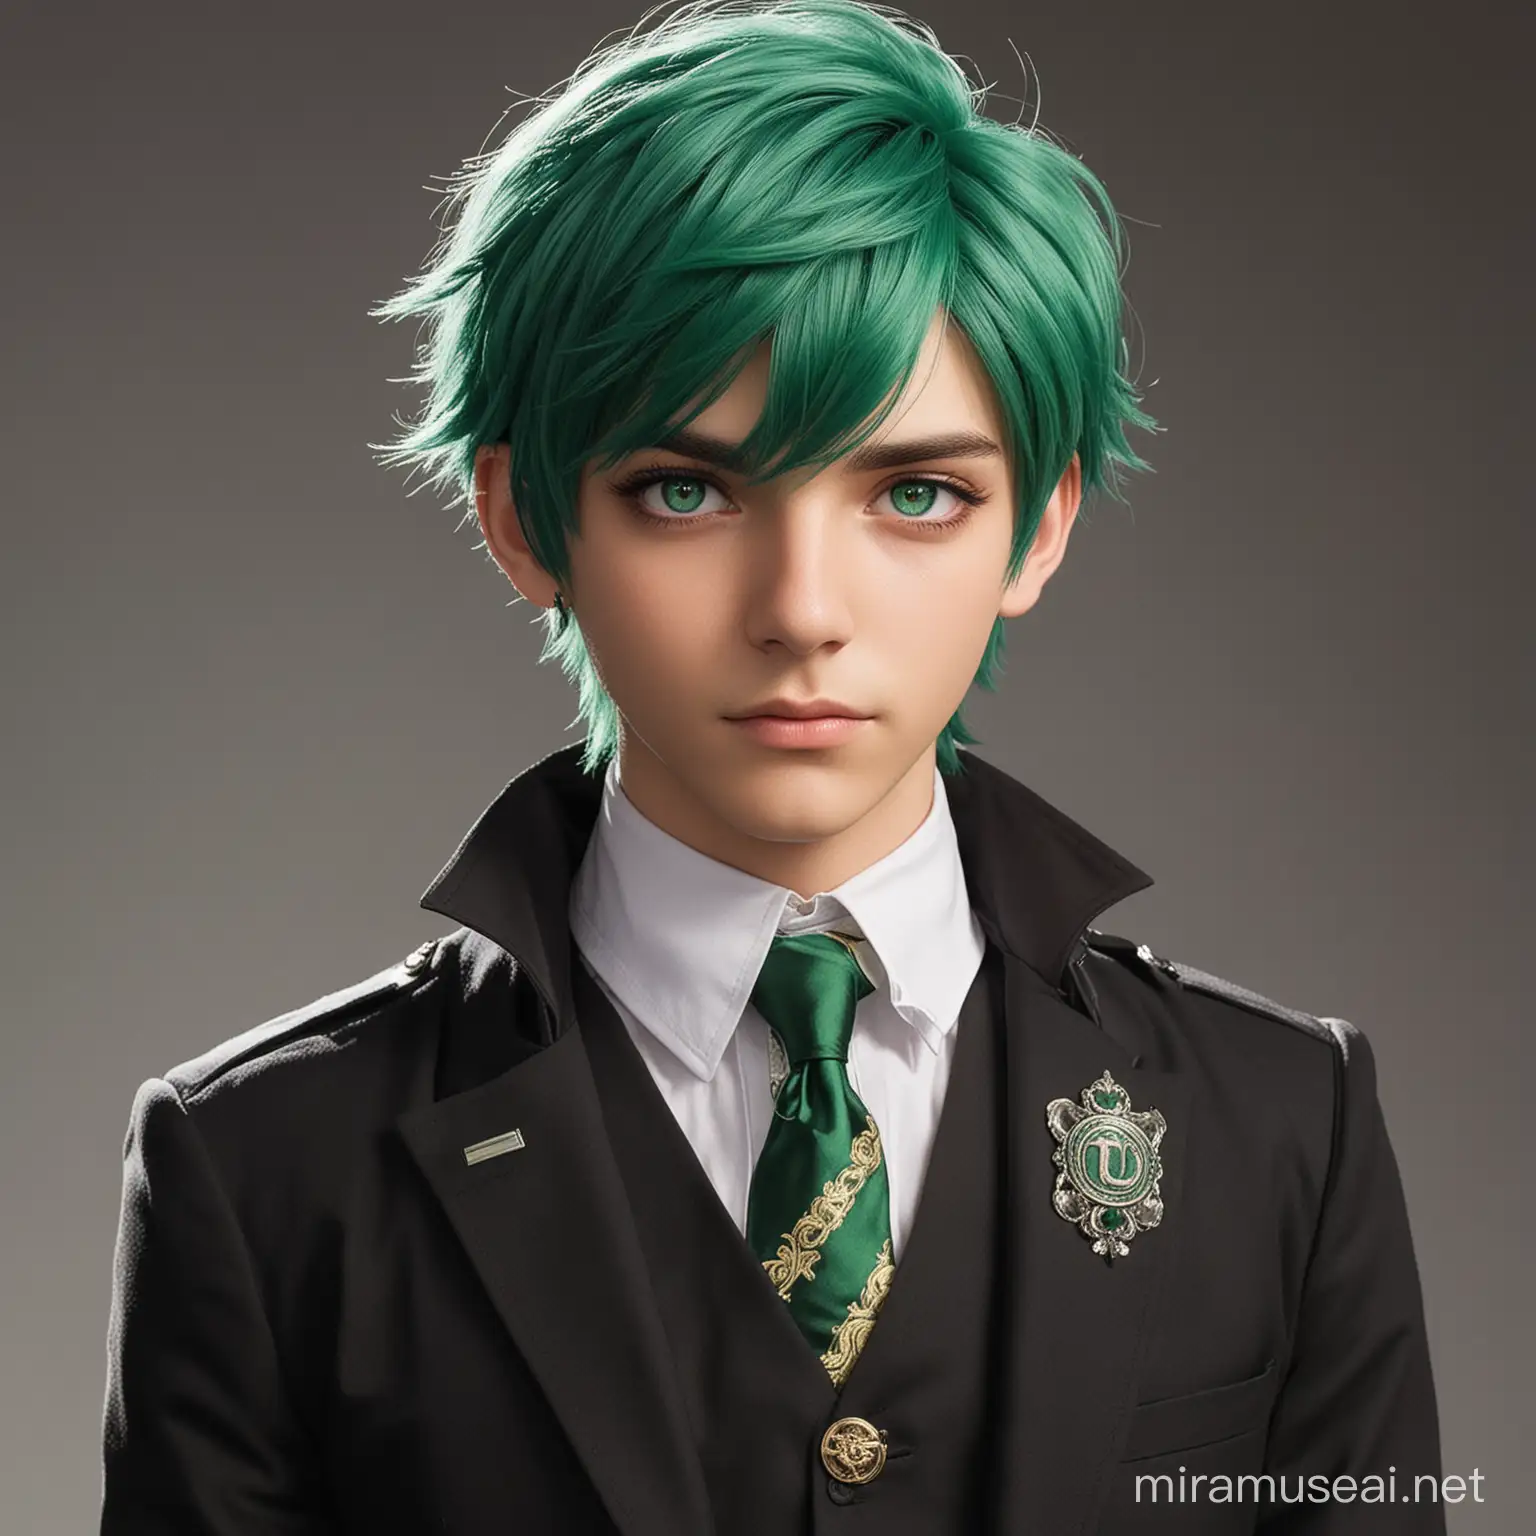 Green Haired Male in Black and Green Magic Academy Outfit